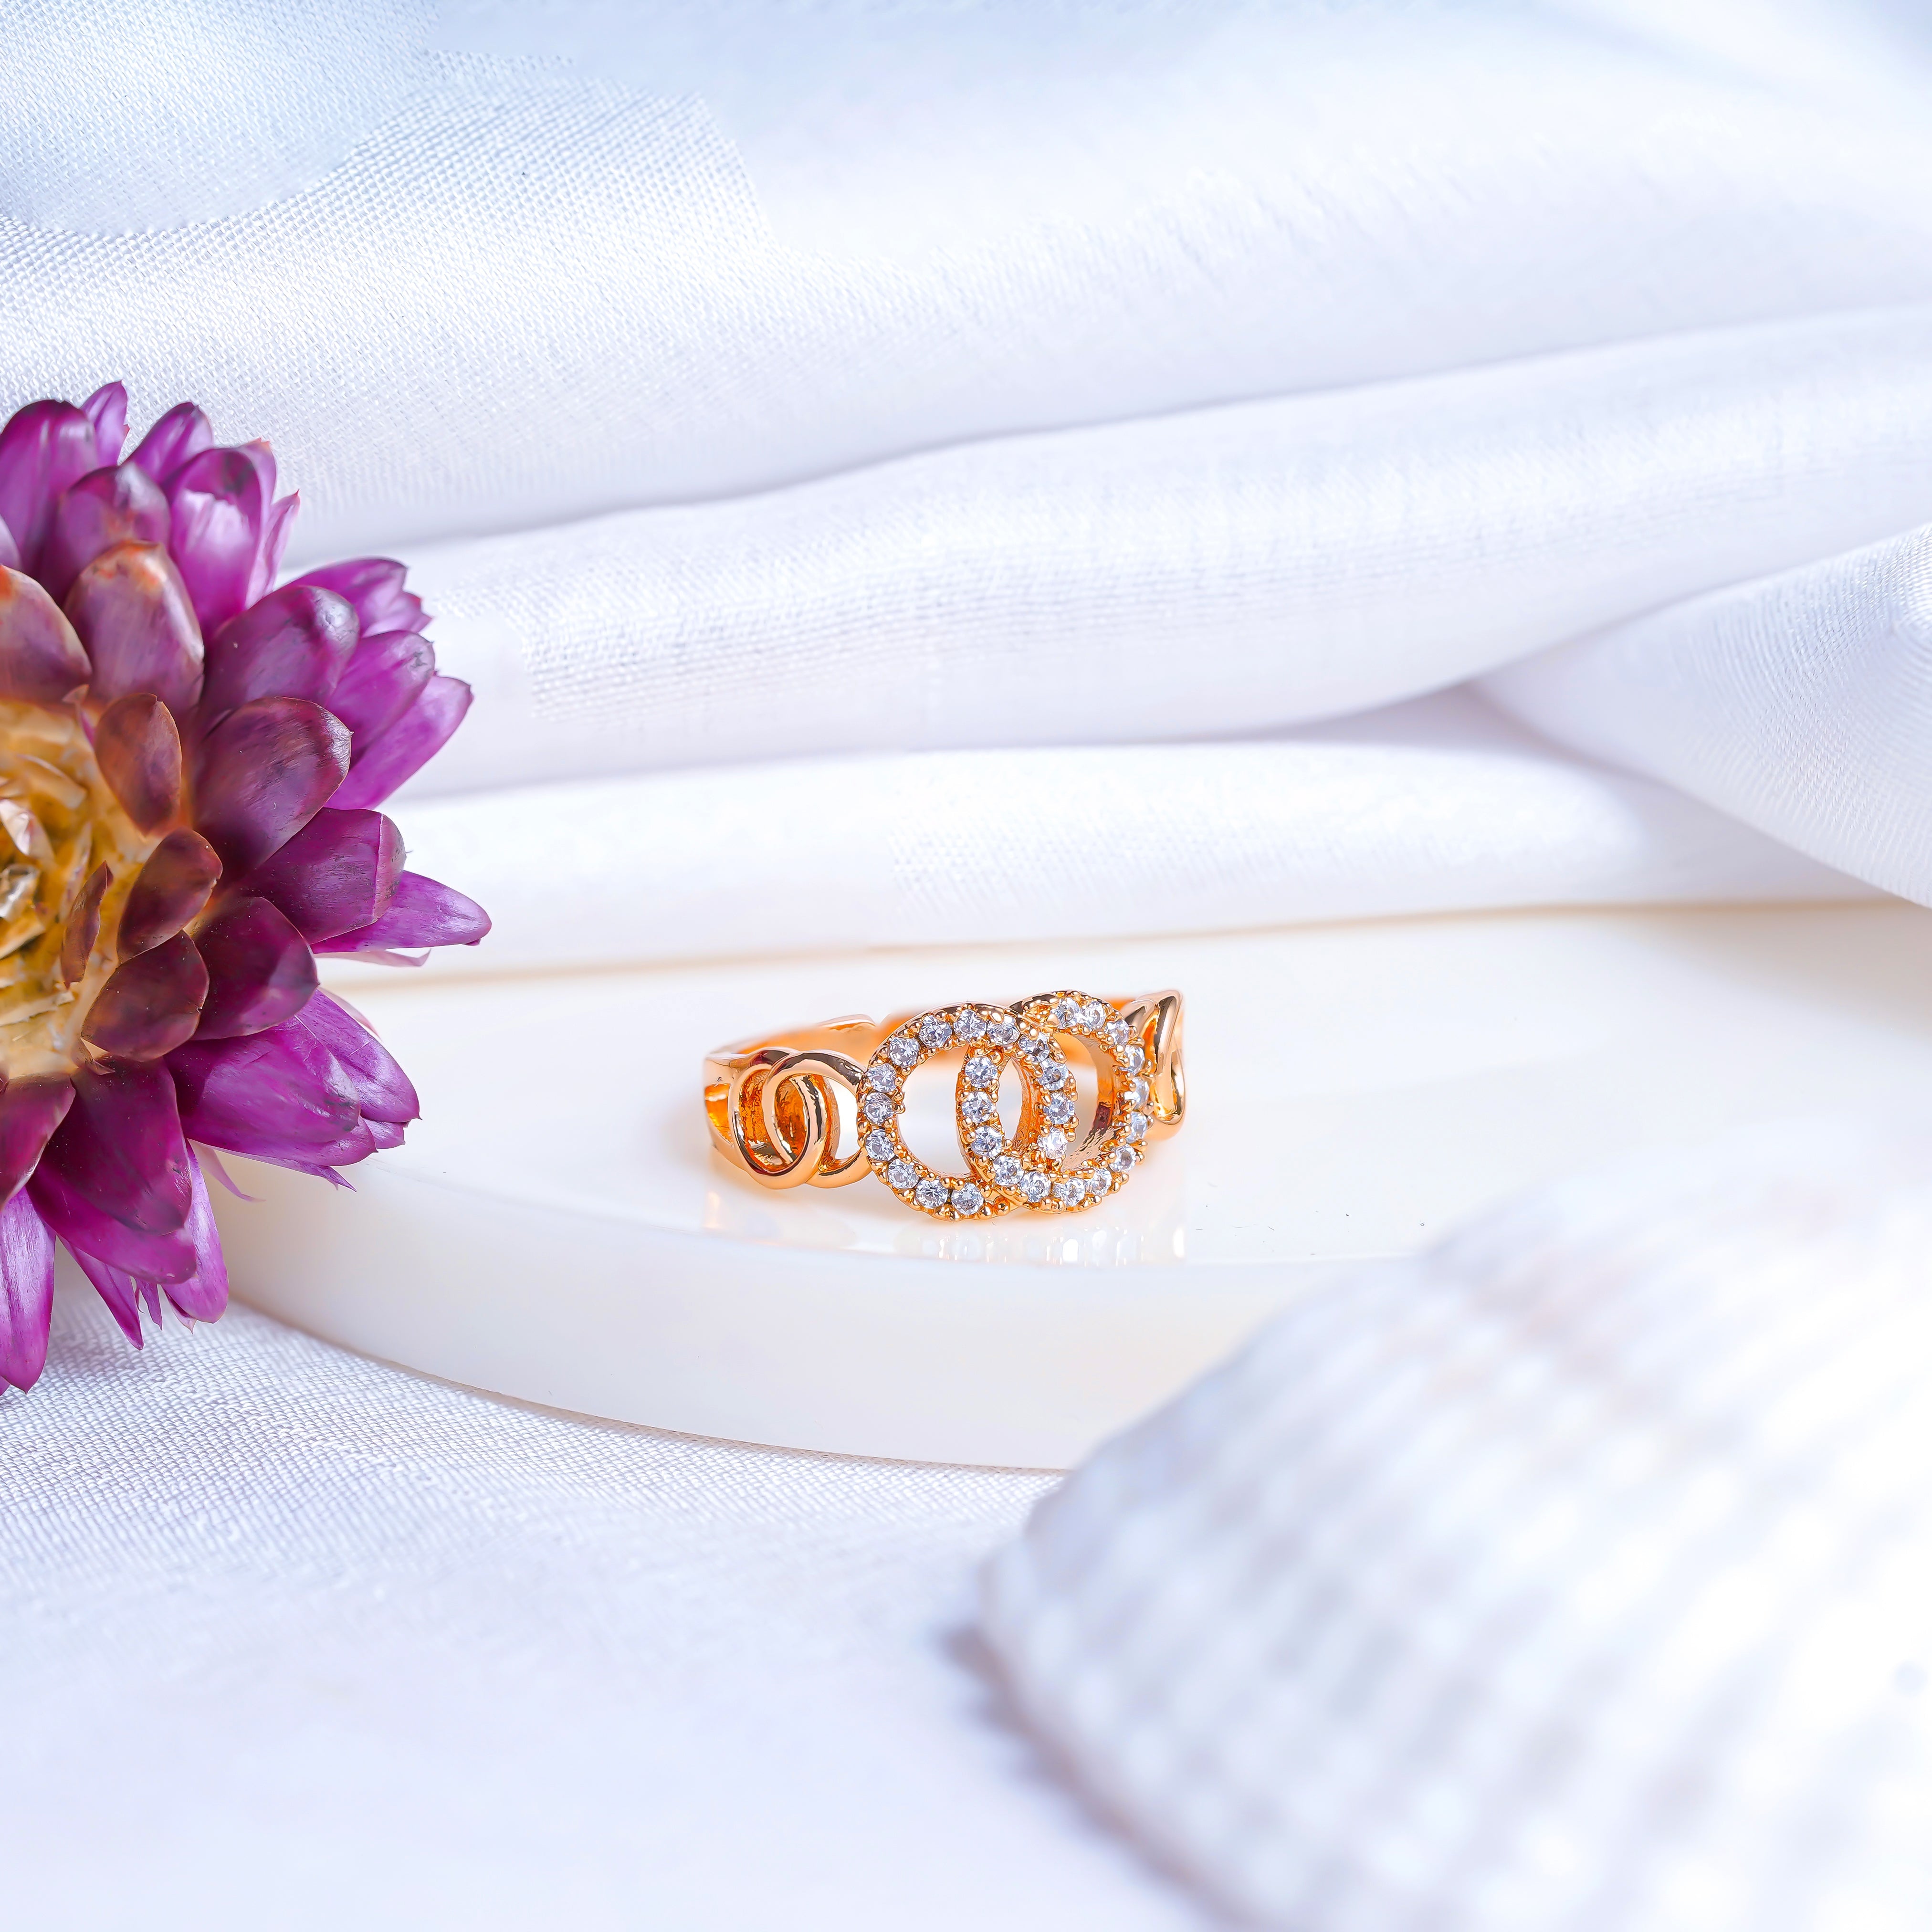 "Jewelsium Serenity: Find Peace and Beauty in Our Rings"